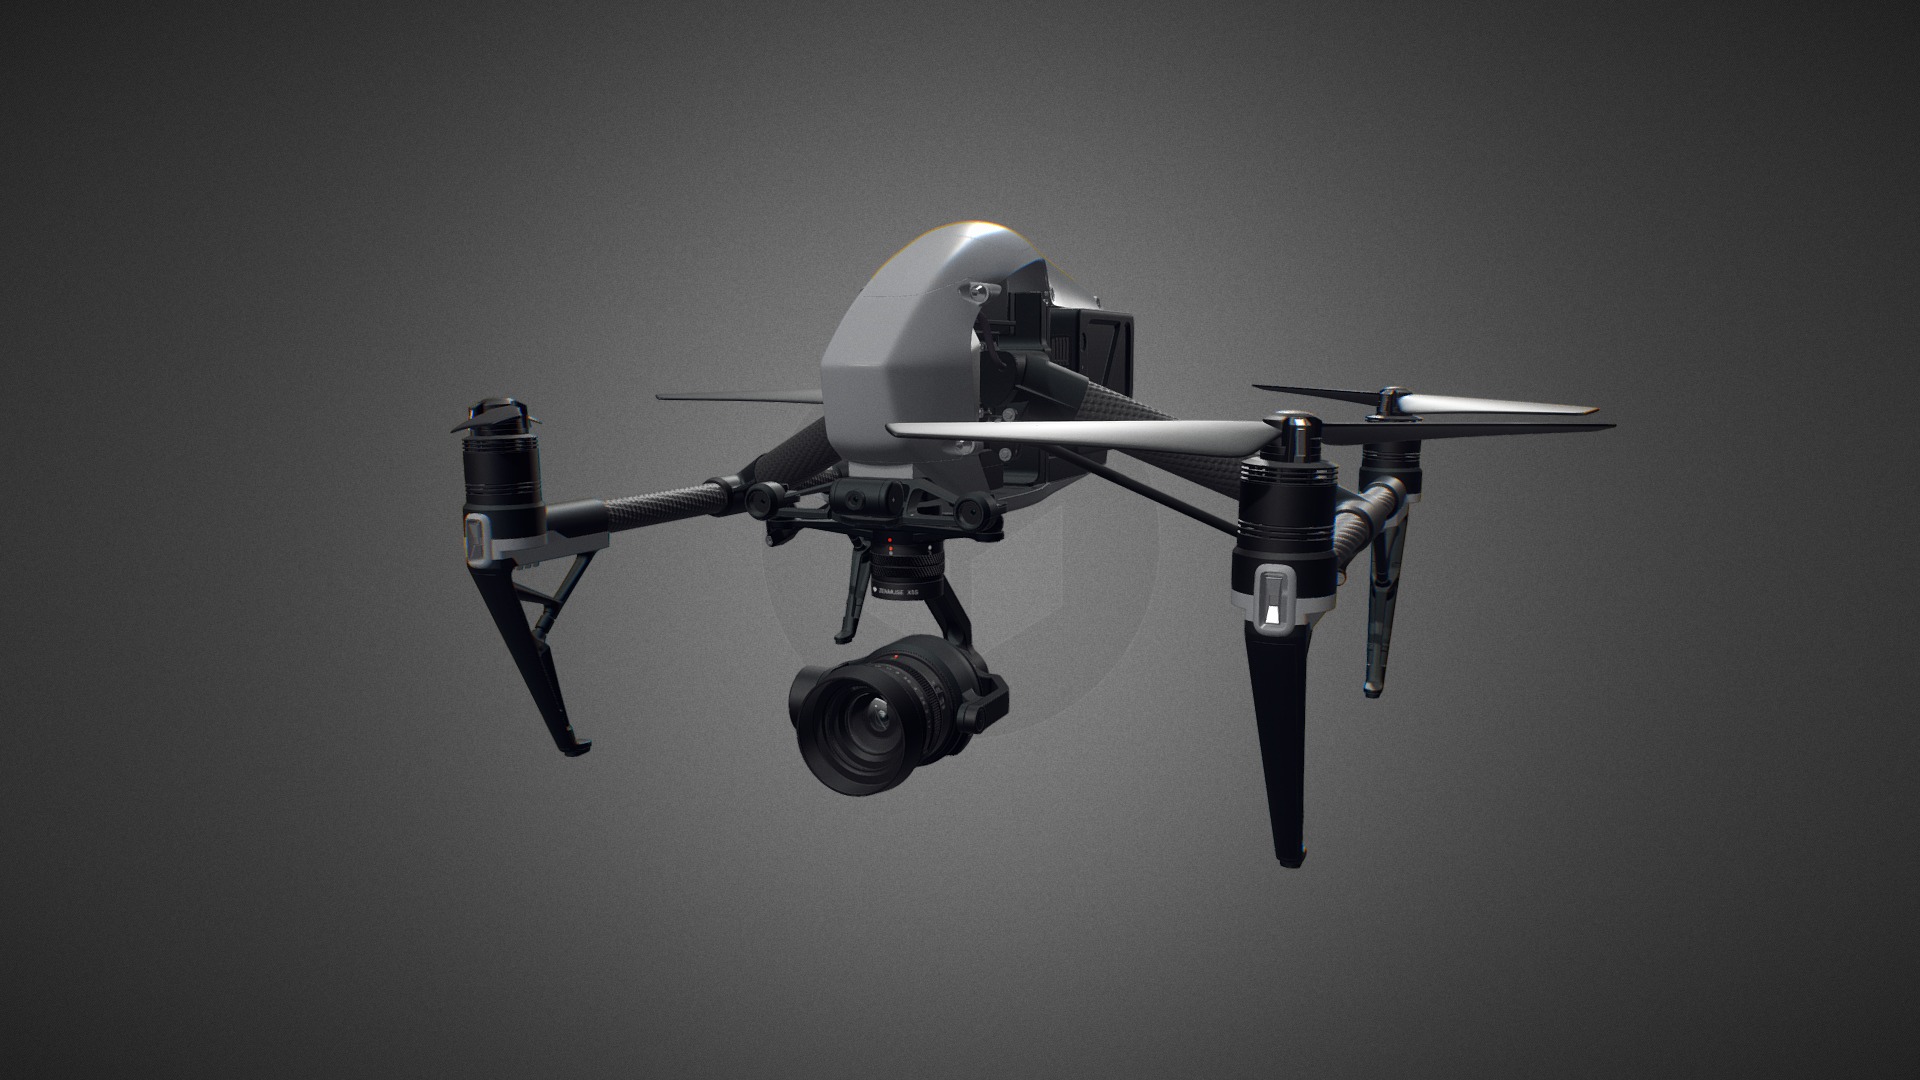 3D model DJI Inspire 2 for Element 3D - This is a 3D model of the DJI Inspire 2 for Element 3D. The 3D model is about a drone flying in the sky.